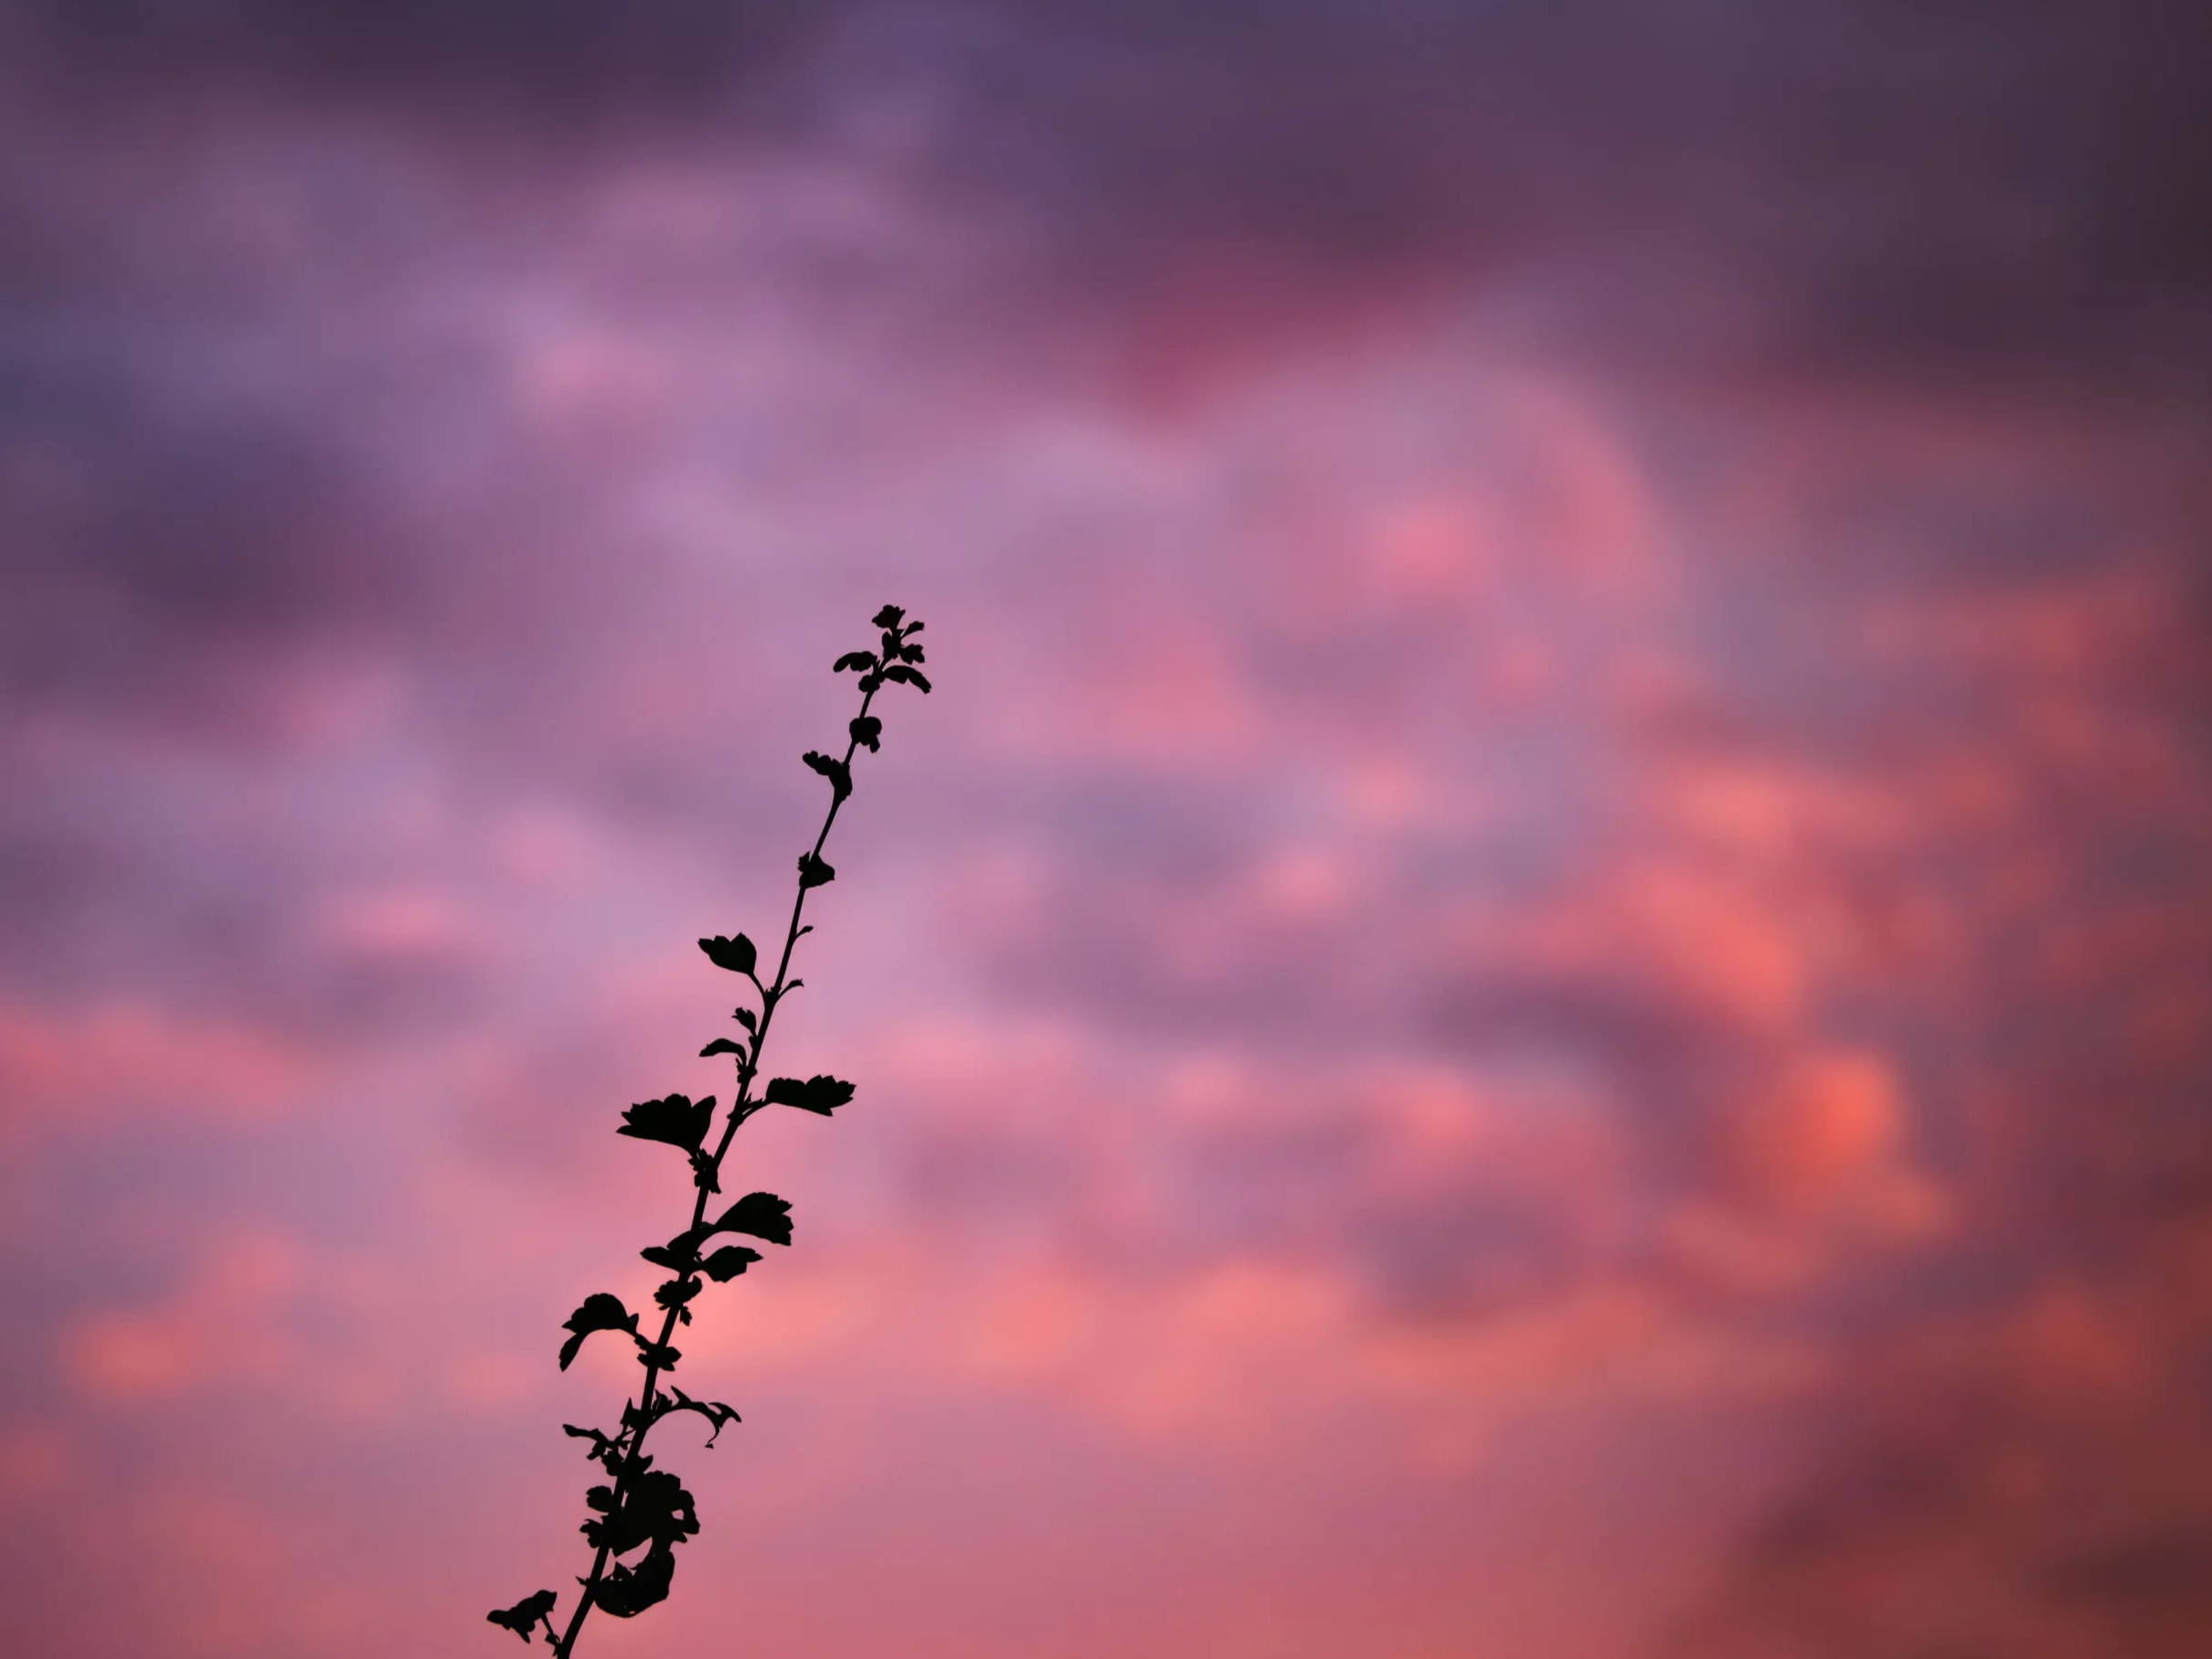 A plant in silhouette in front of a pink and purple sunset